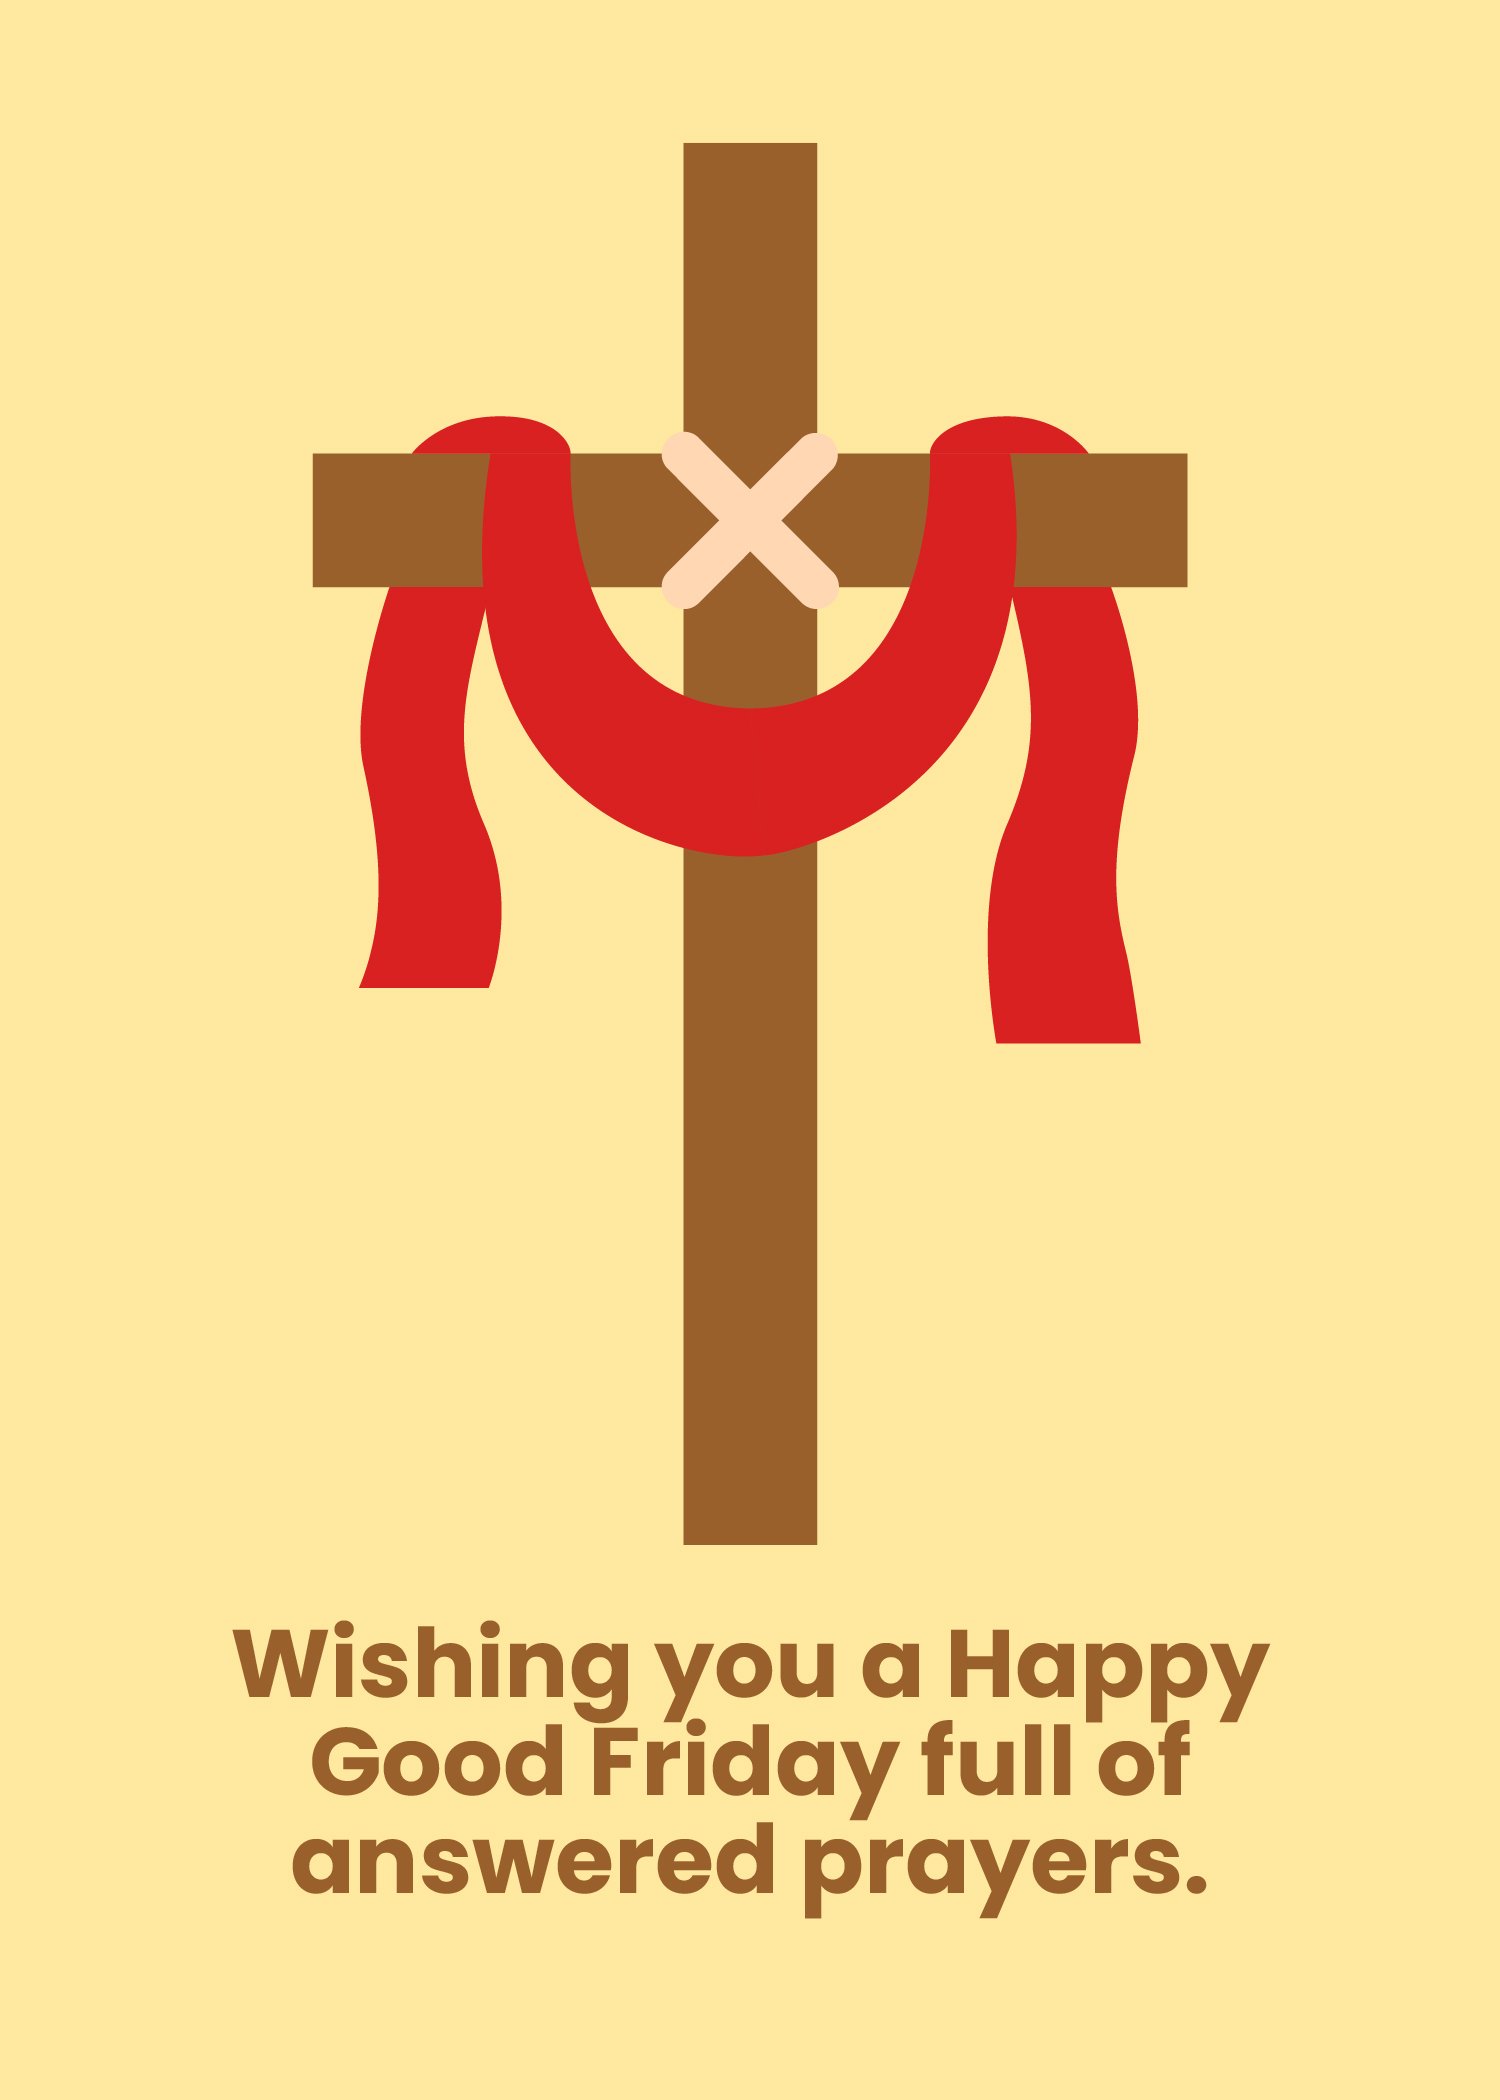 Good Friday Wishes in EPS, Illustrator, JPEG, Word, PSD, PNG, SVG